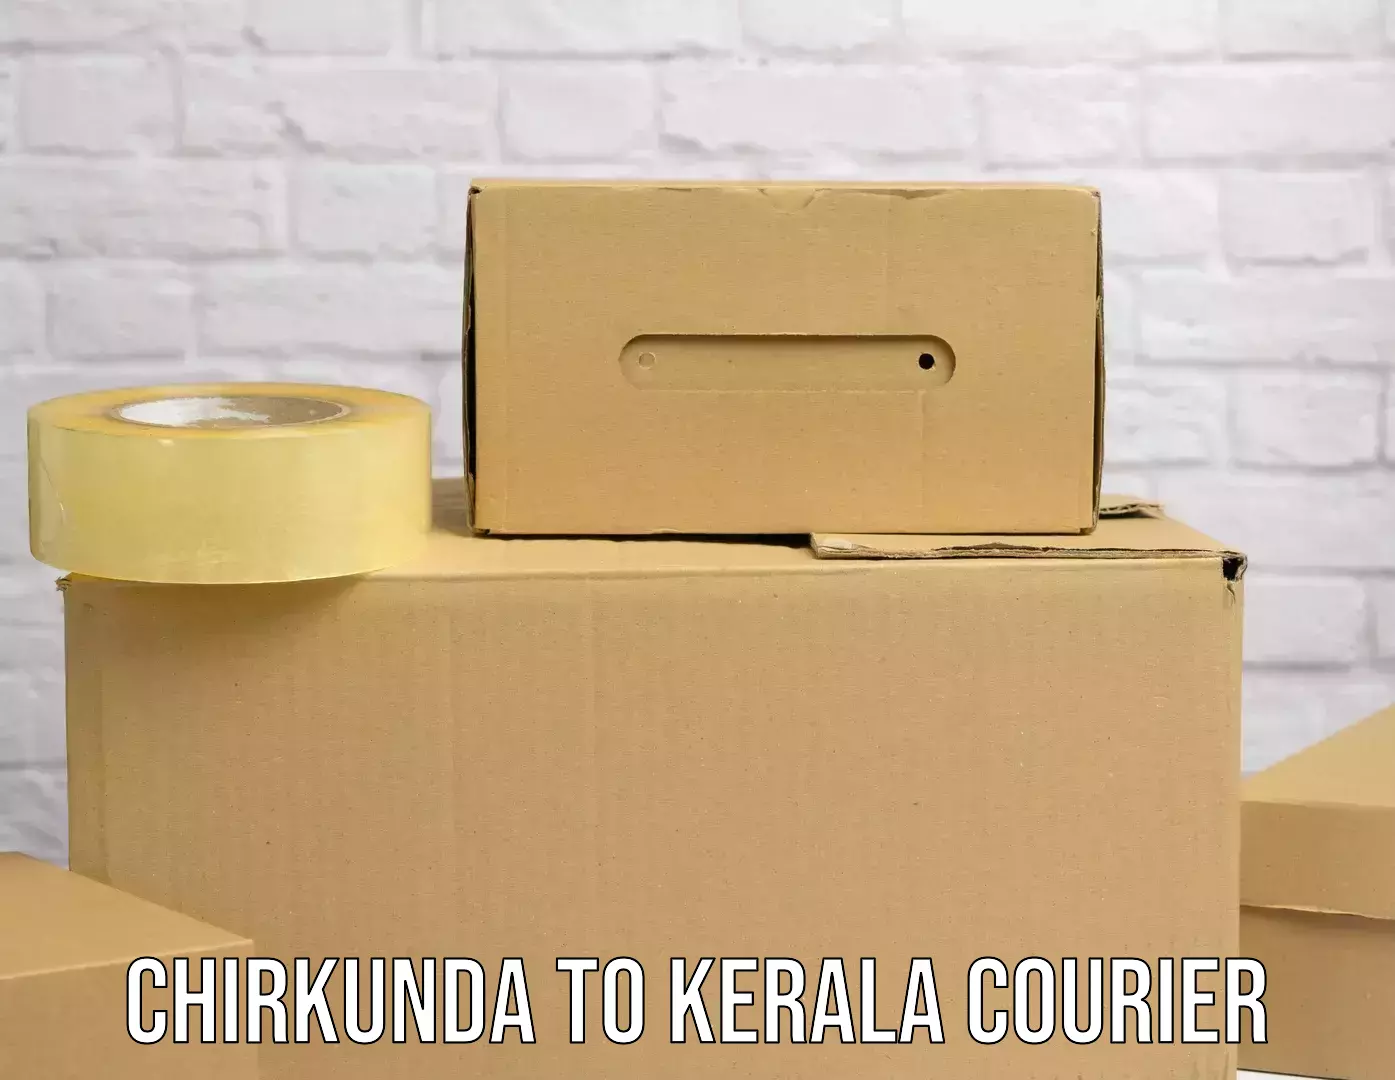 E-commerce shipping Chirkunda to Cochin University of Science and Technology